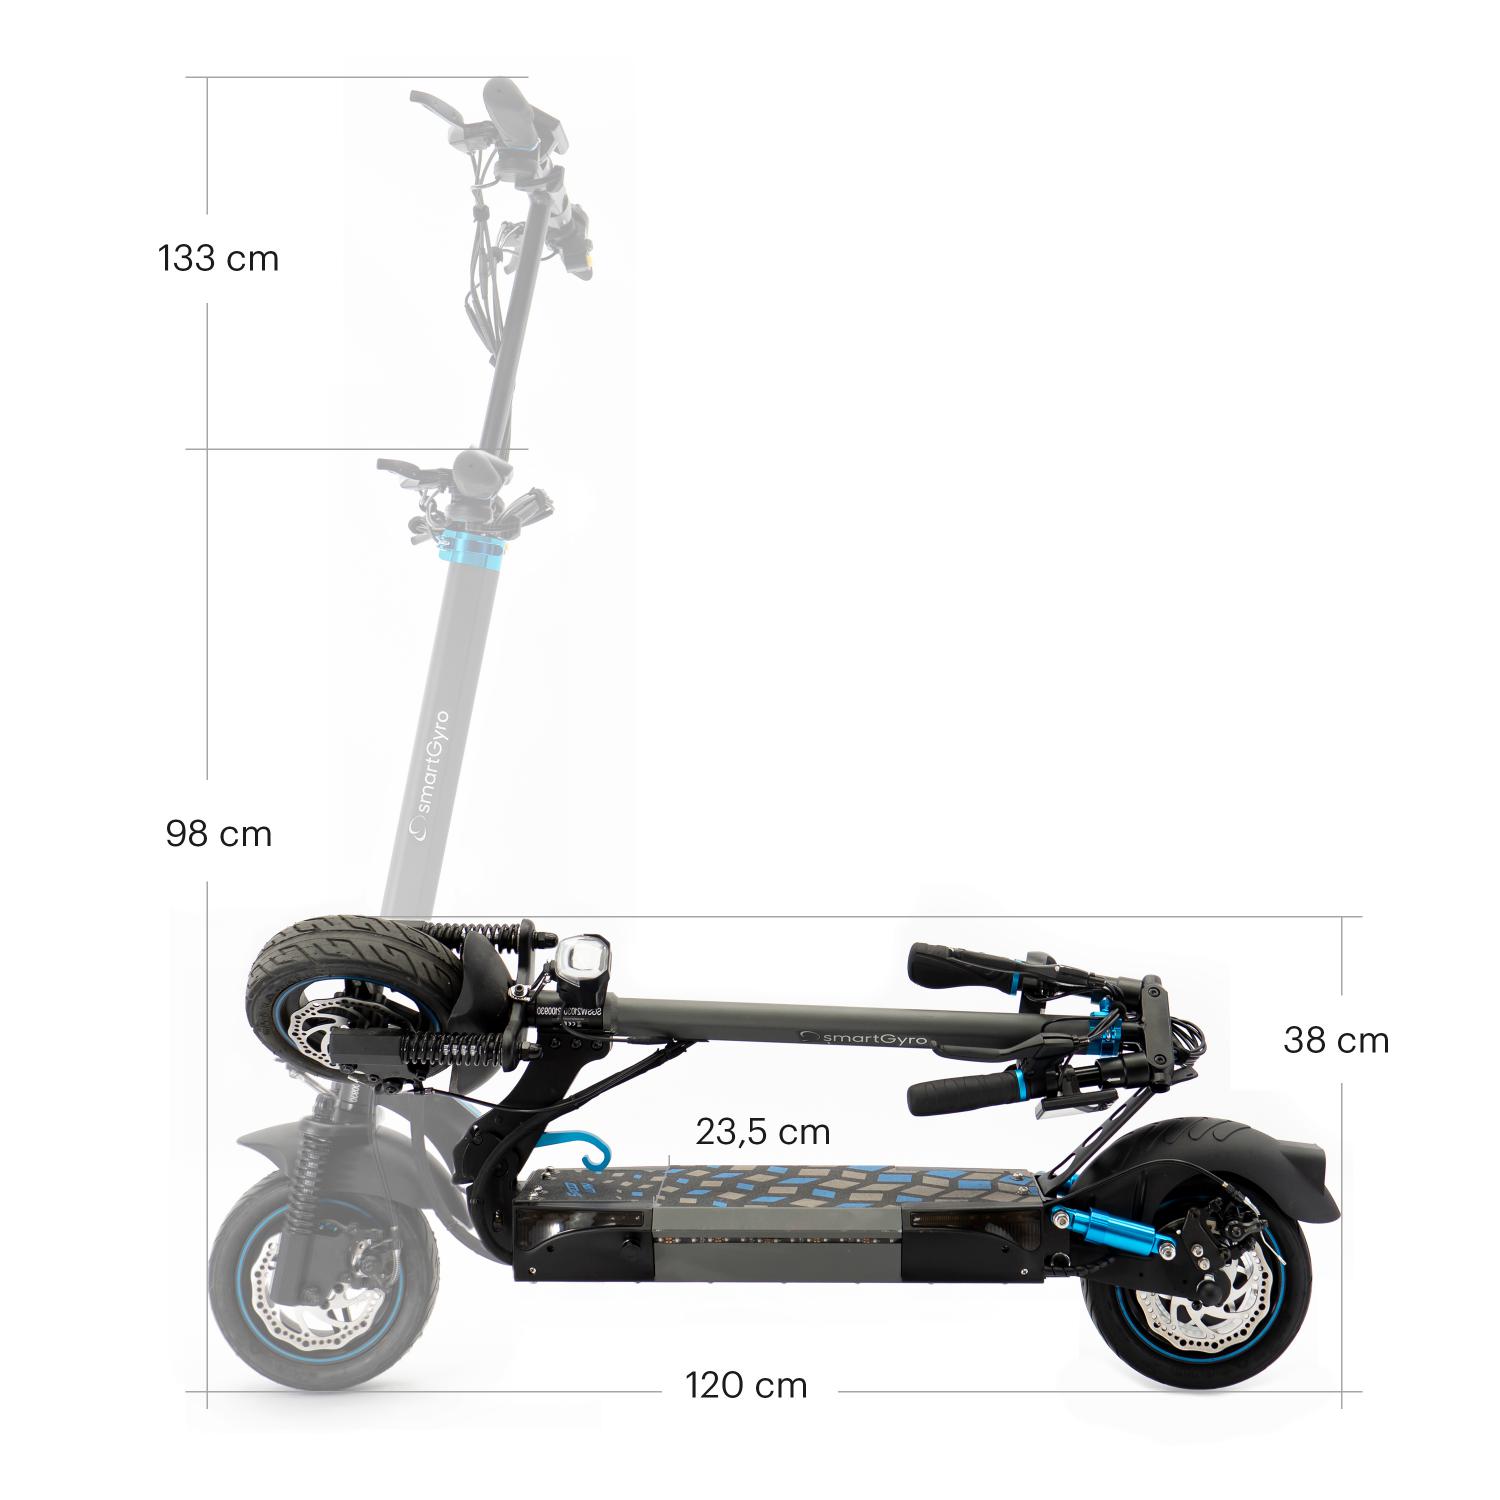 Smartgyro Raptor - 360Scooters